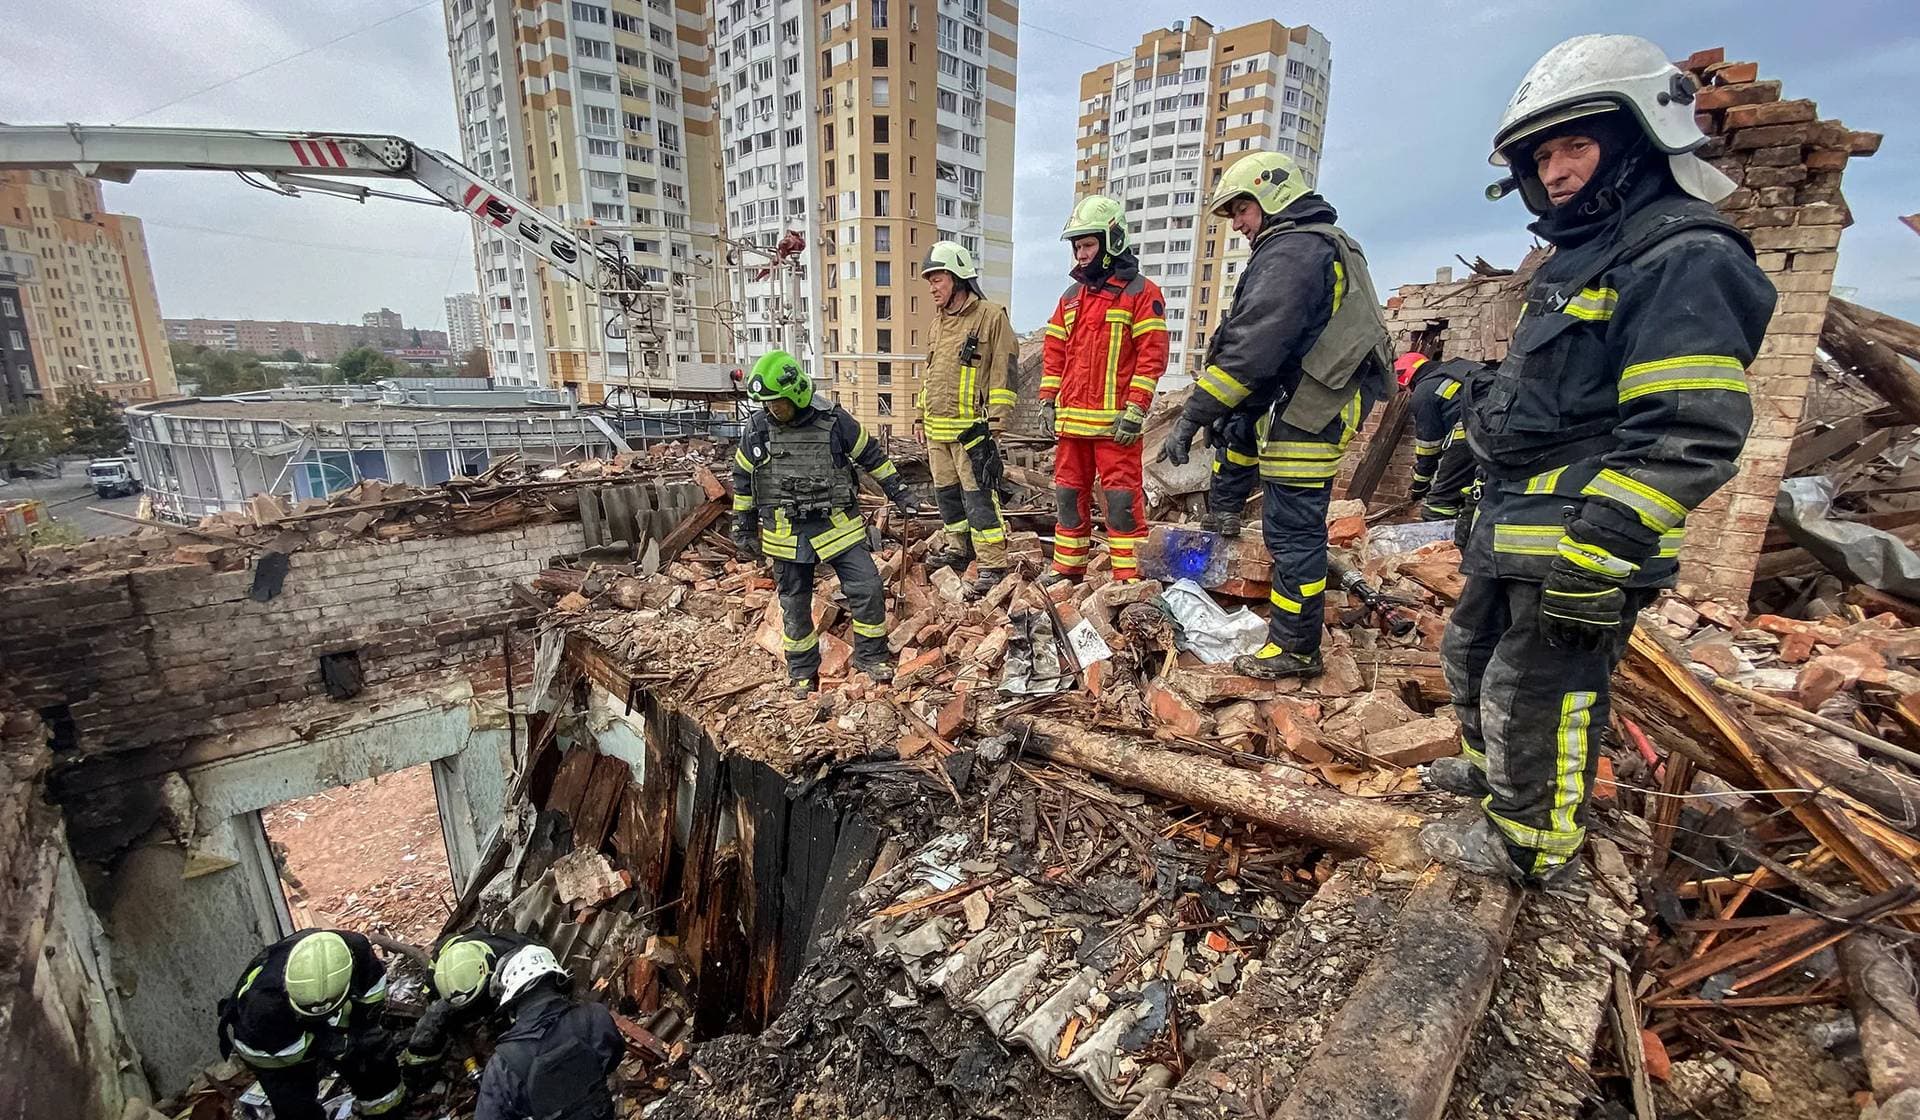 Rescuers work at a site of a residential building damaged by a Russian missile strike in Kharkiv